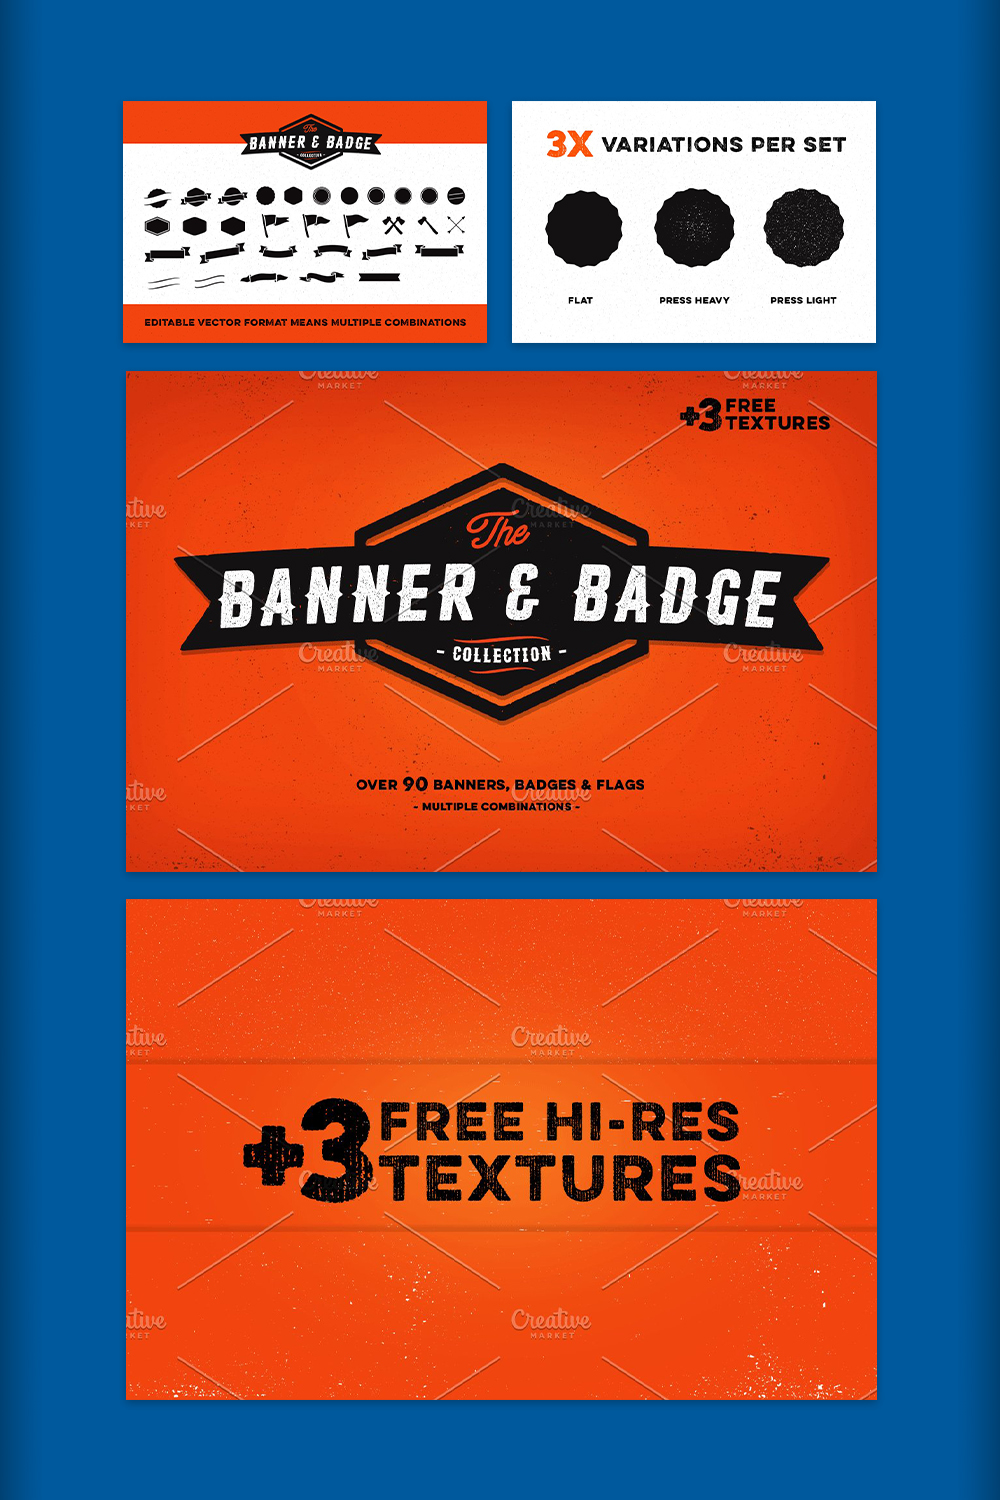 Banner Badge Collection Pinterest image.